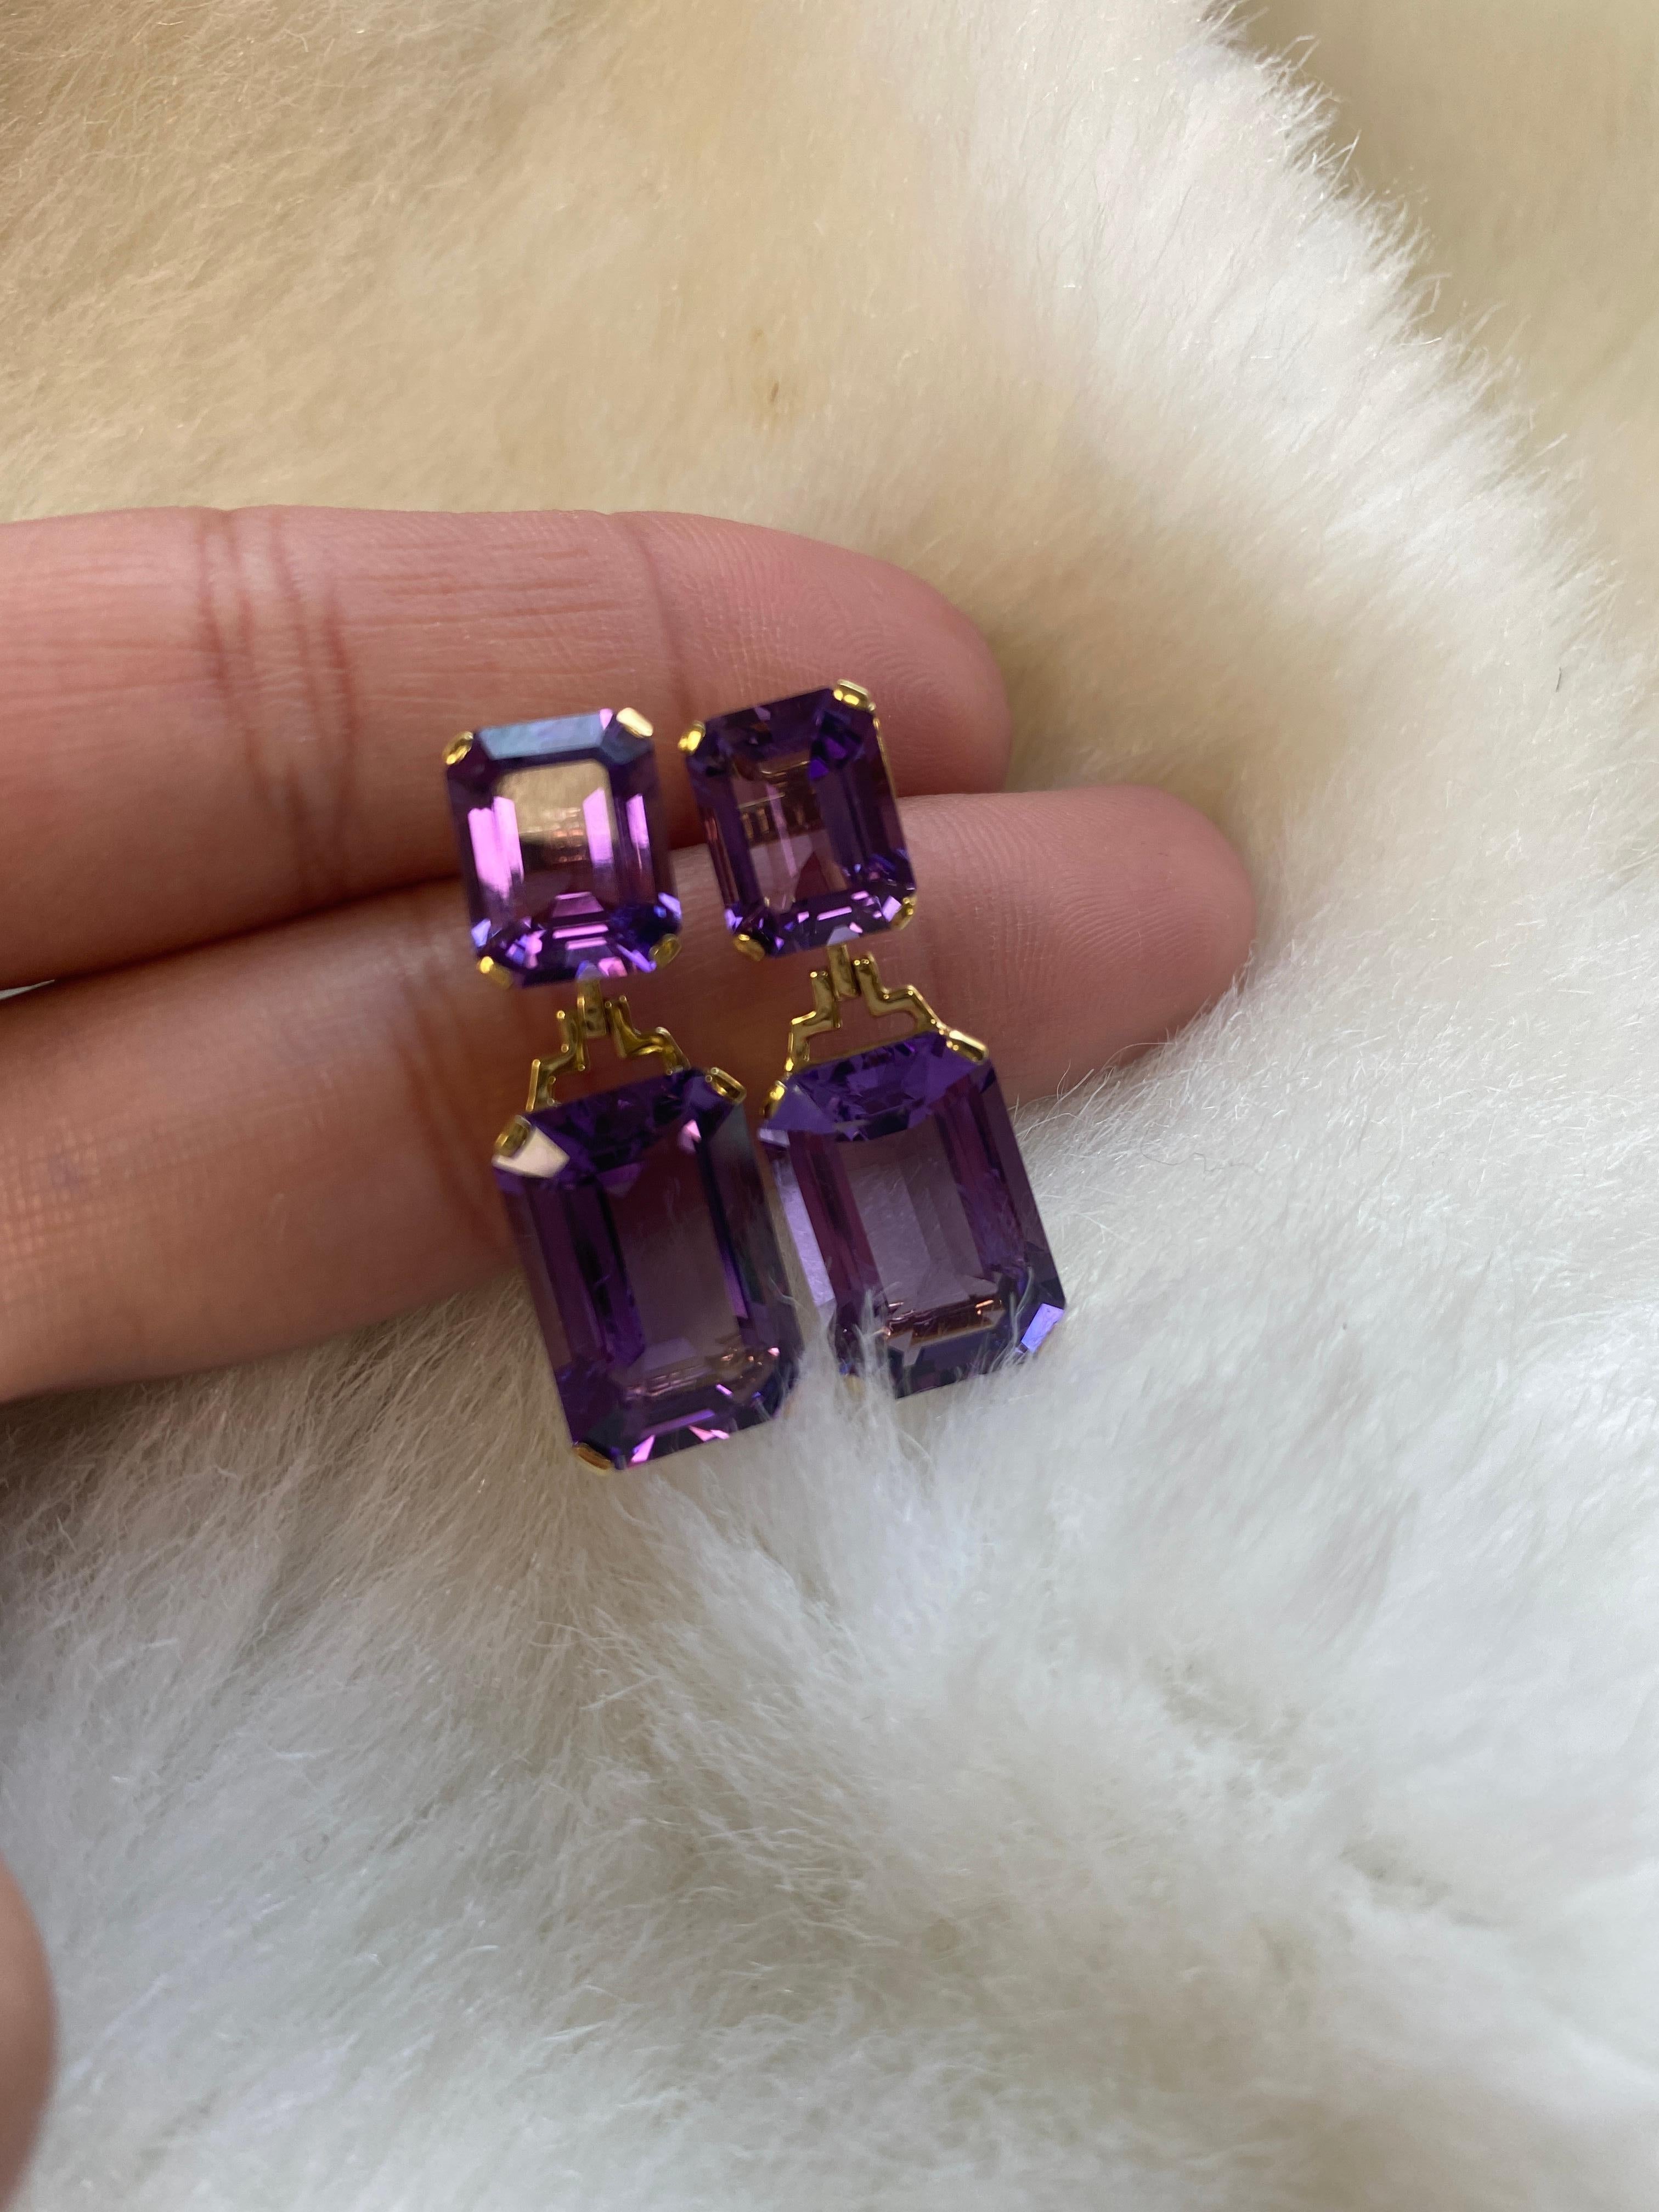 These Amethyst Double Emerald Cut Earrings in 18K Yellow Gold from the 'Gossip' Collection are a show-stopping accessory. The deep purple hue of the amethyst stones combined with the double emerald cut design creates a striking and unexpected look.